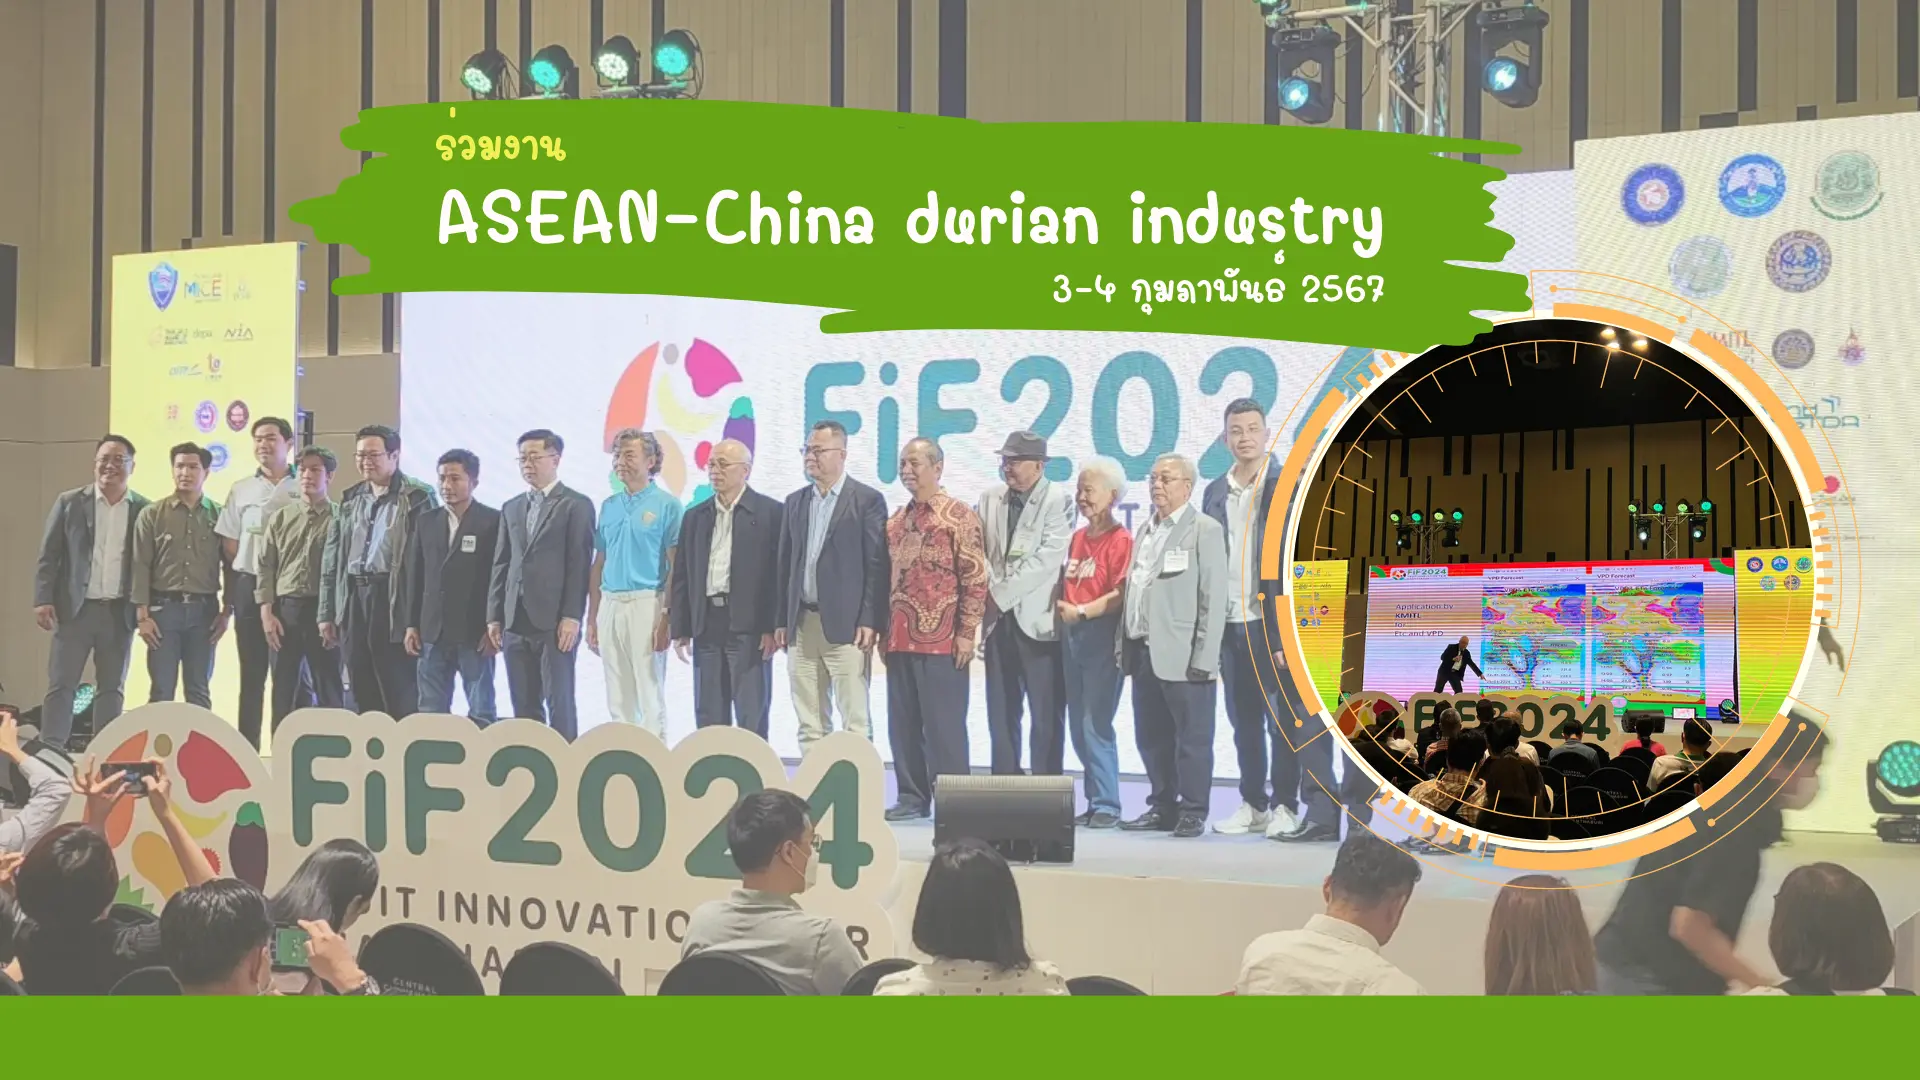 ASEAN-China durian industry